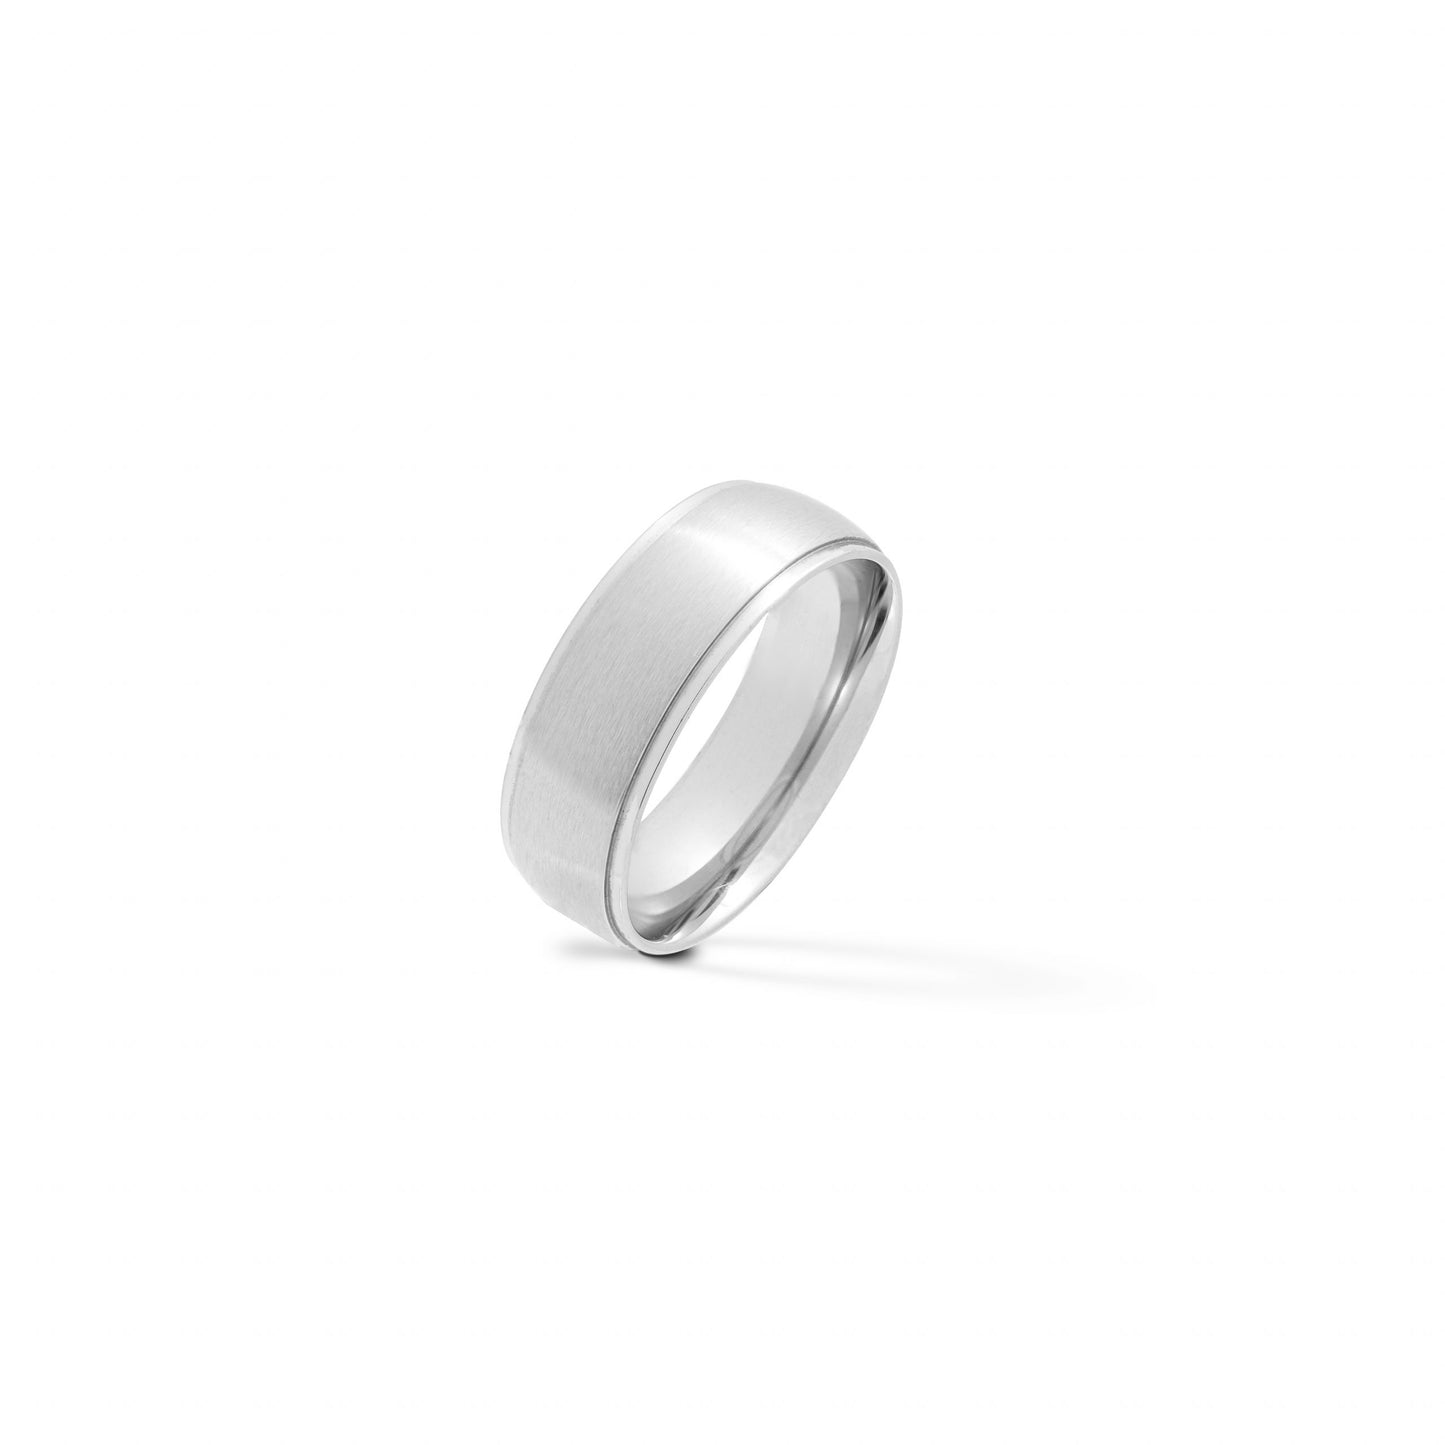 Brushed Rounded Center with Polished Edge Stainless Steel Ring